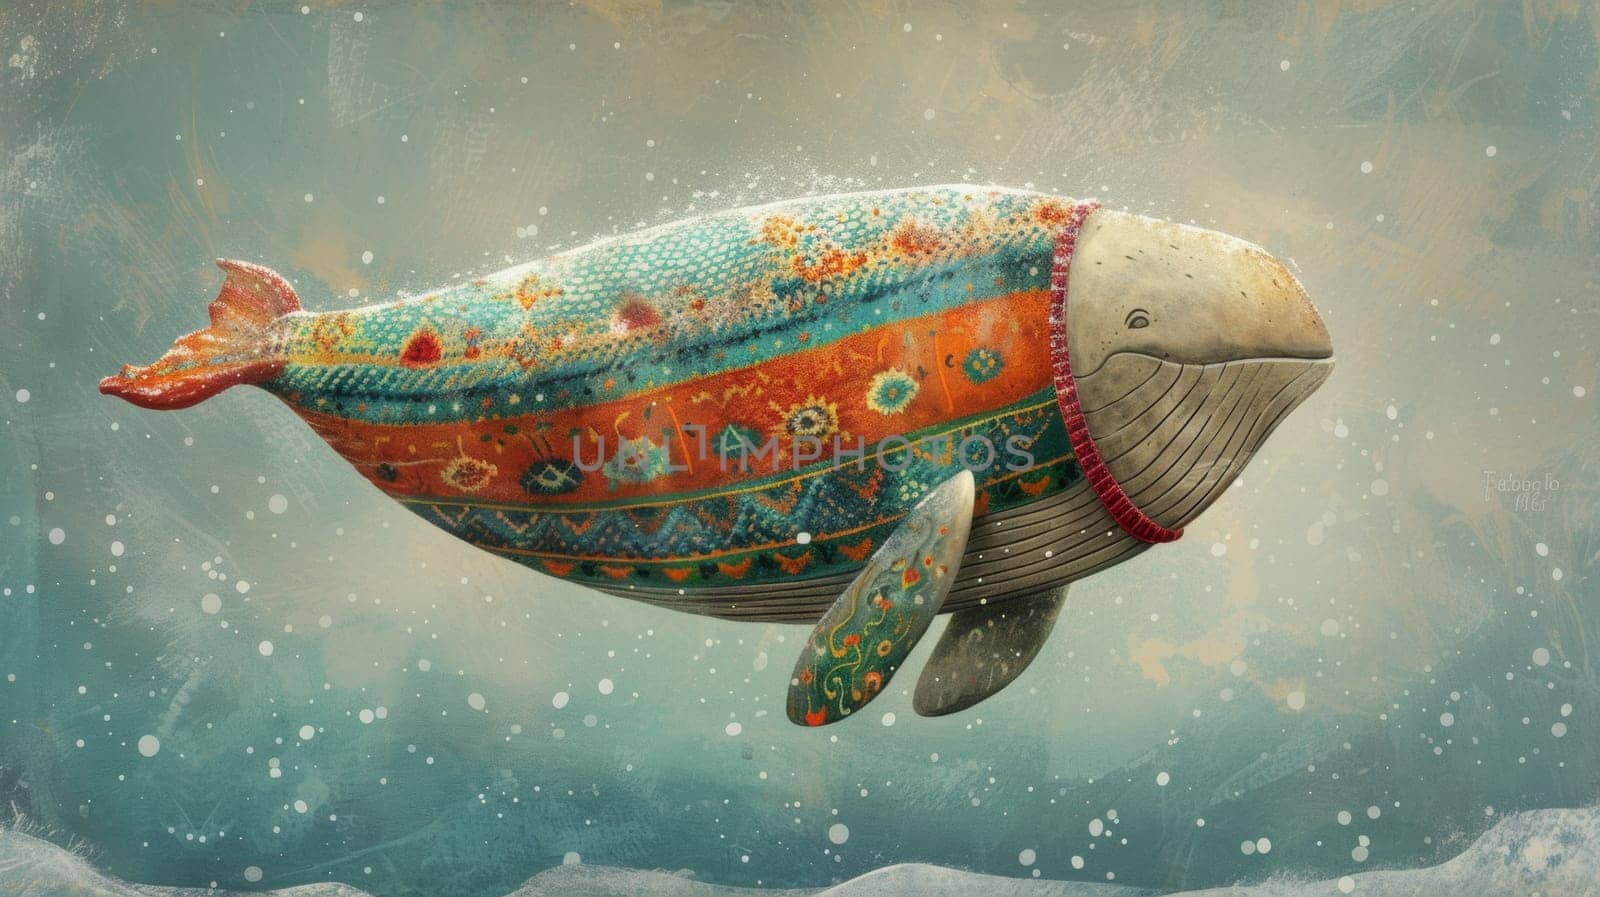 A whale with a colorful sweater is swimming in the water